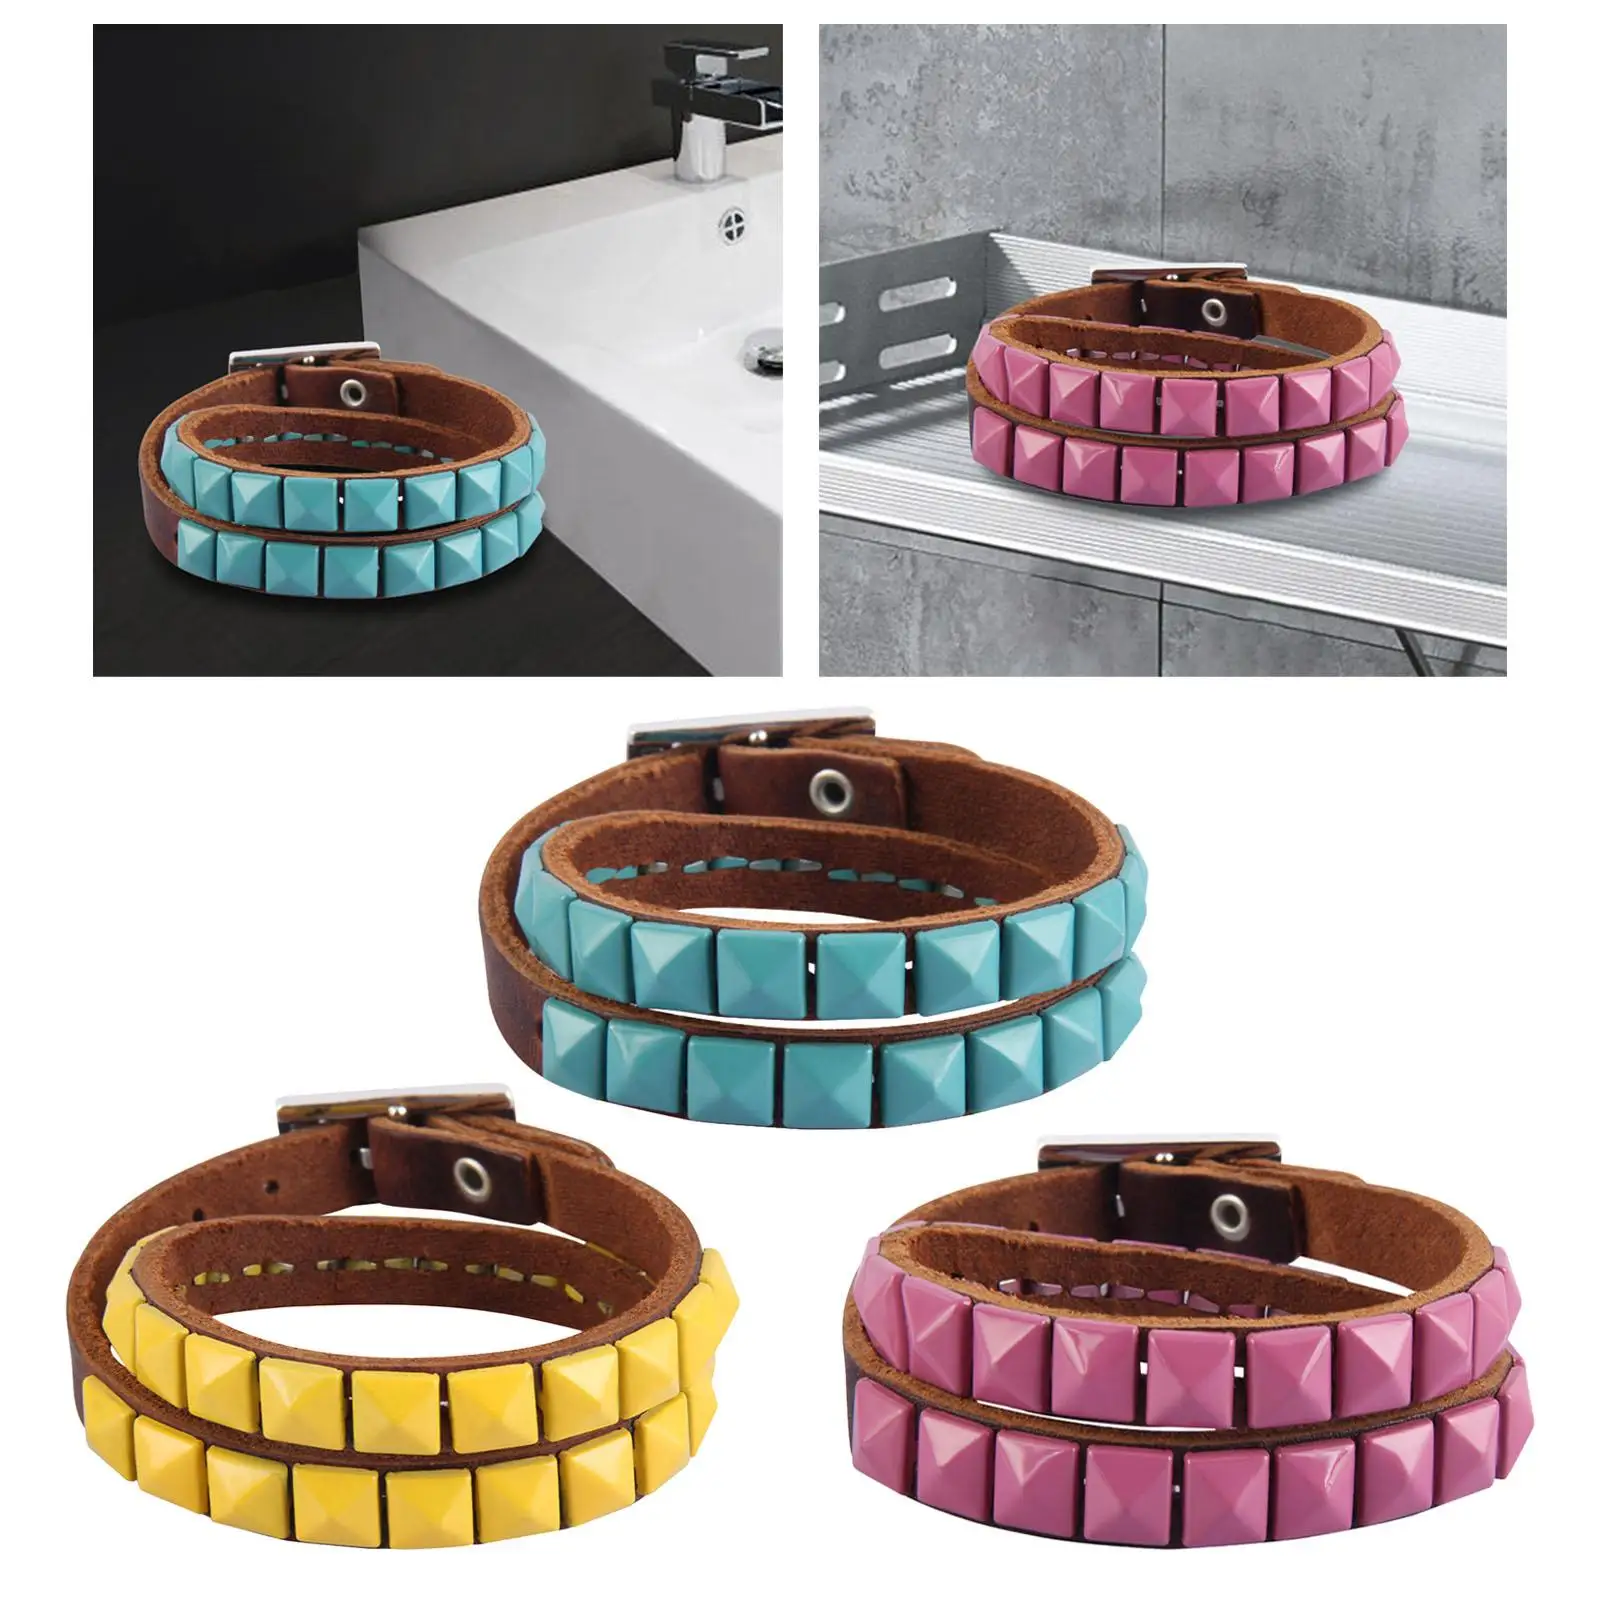 Punk Studded Bracelet Wide Thick Adjustable PU Leather Wristband Cuff Bangle for Men Women Party Favors Wedding Holiday Prom